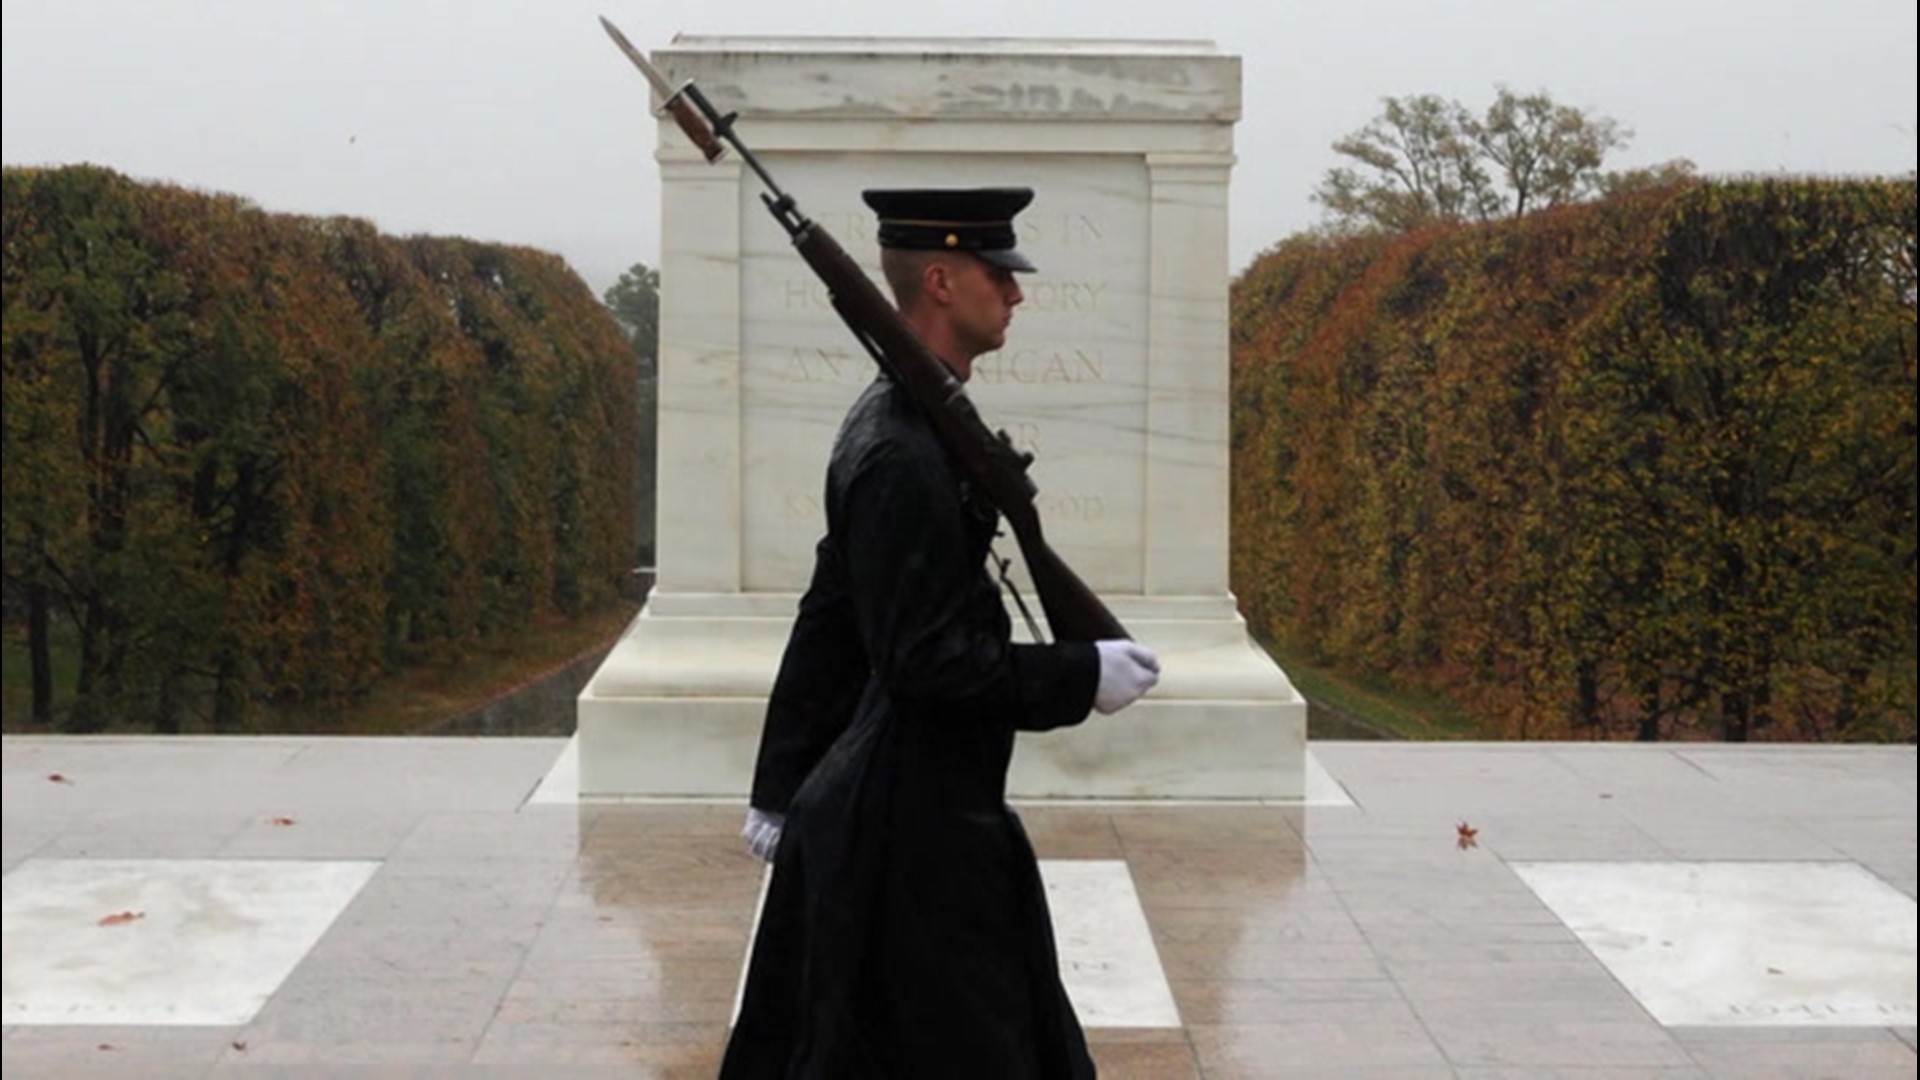 Tomb Sentinels guard the Tomb of the Unknown Soldier every second of every day, no matter the weather. Elite volunteers from the US Army 3rd Infantry have kept watch since 1948 inside Arlington National Cemetery.
 

 

No matter when you watch this story or what the weather is doing, a solitary sentinel is watching over the Tomb of the Unknown Soldier inside Arlington National Cemetary.  Accuweather's Jonathan Petramala has their story.